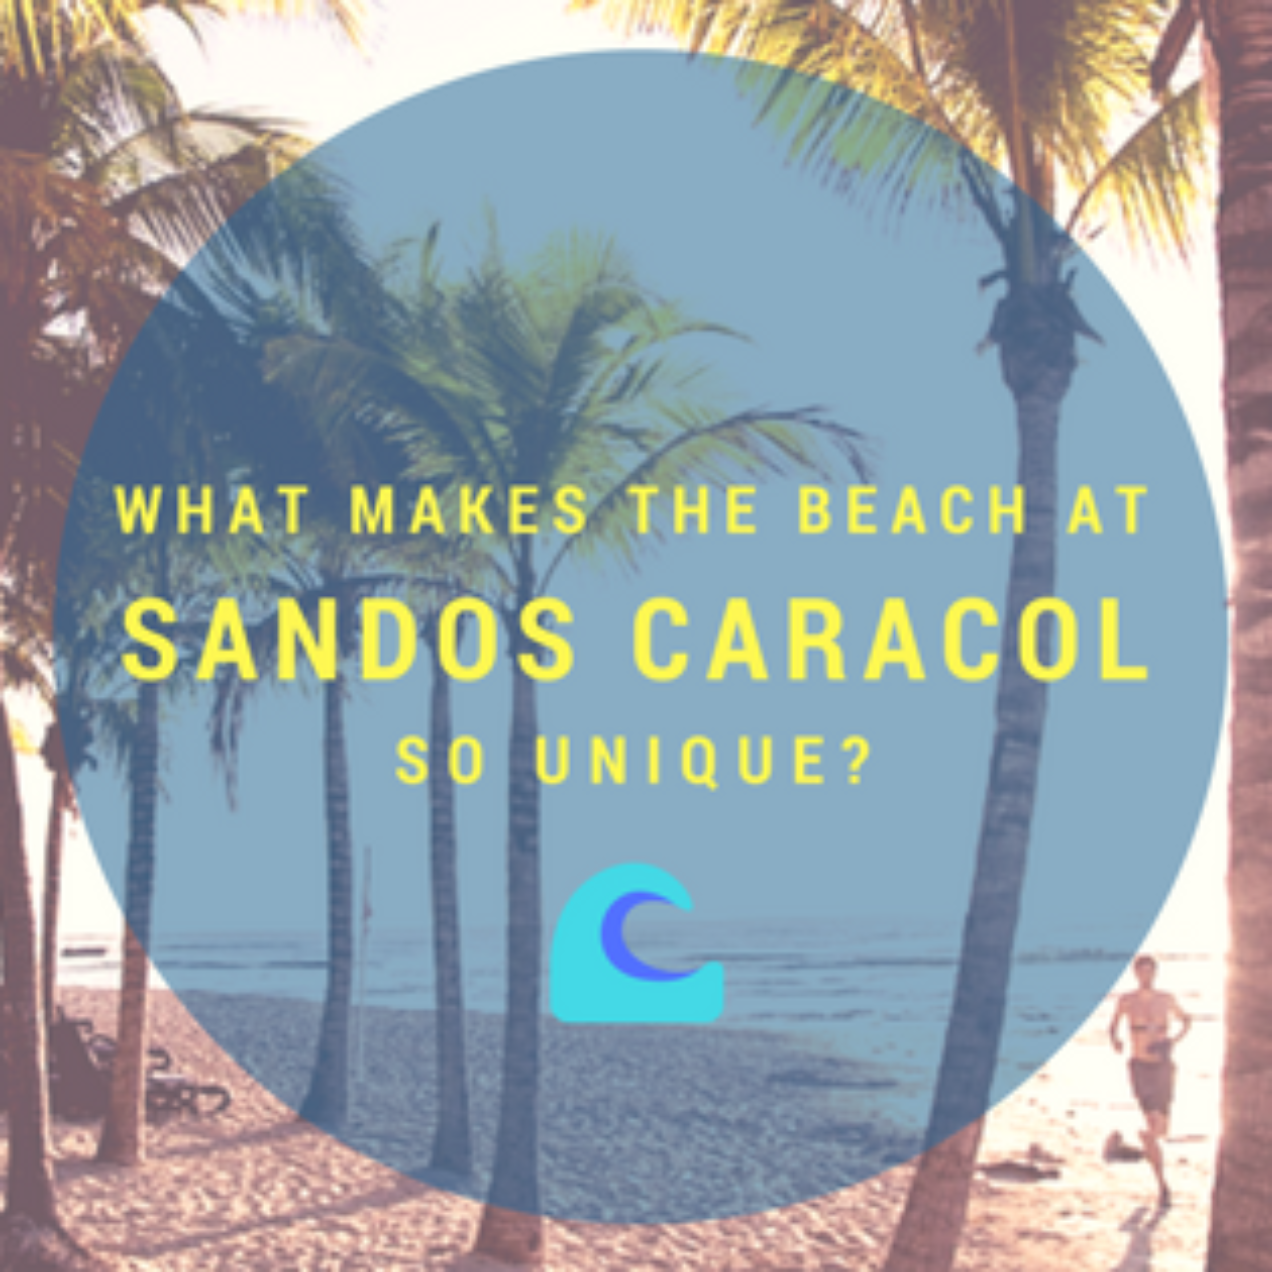 What Makes the Beach at Sandos Caracol so Unique?